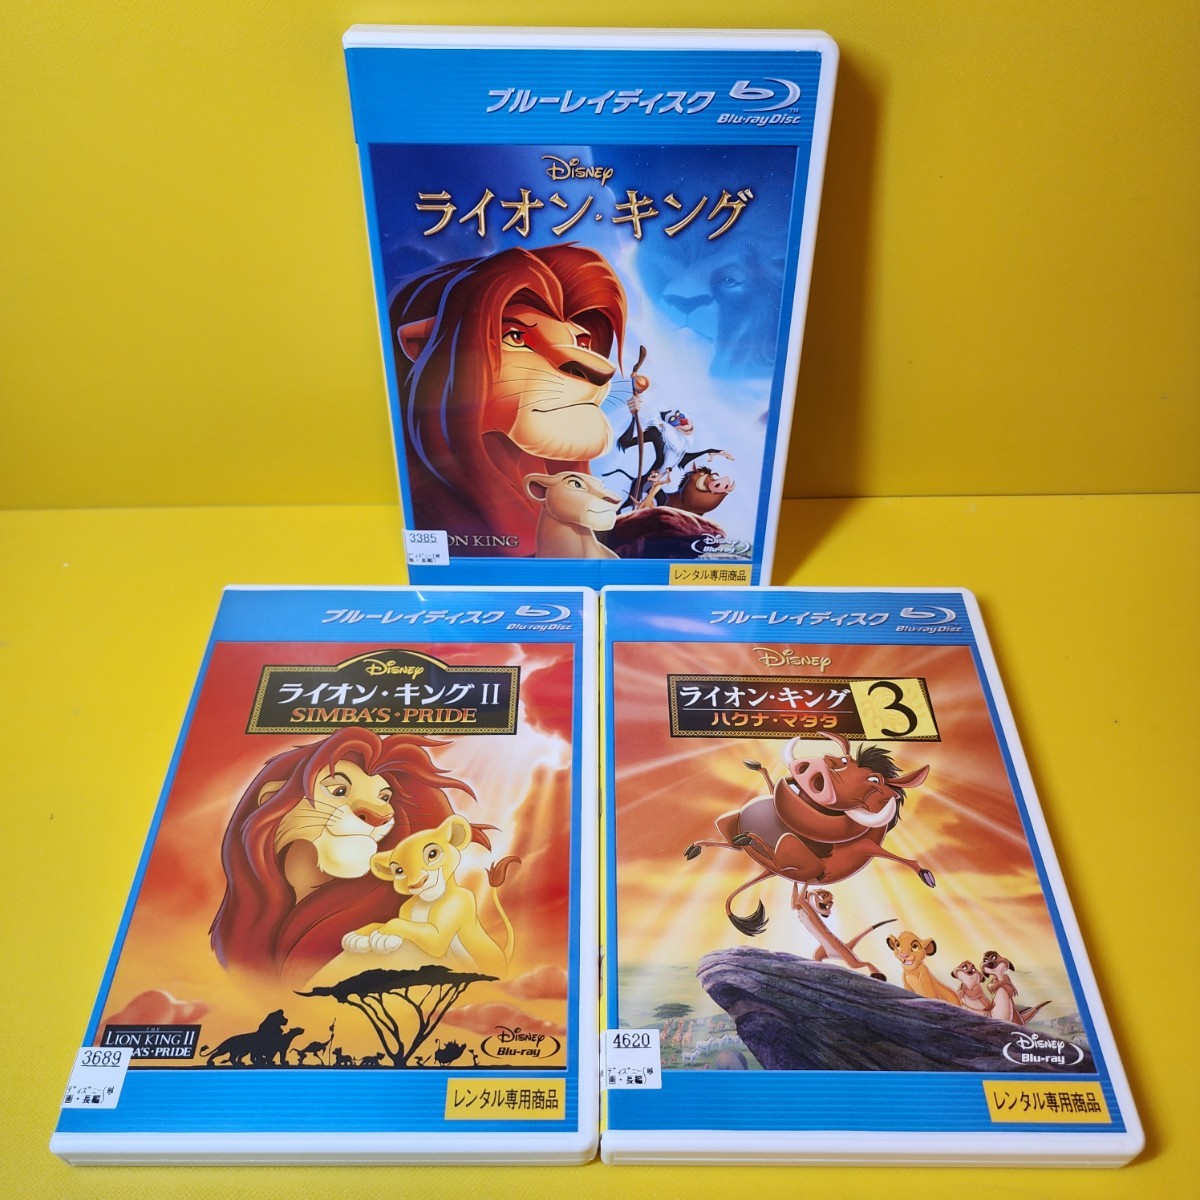 * new goods case replaced lion * King Blue-ray 3 volume set lion * King special * edition lion * King 2simba